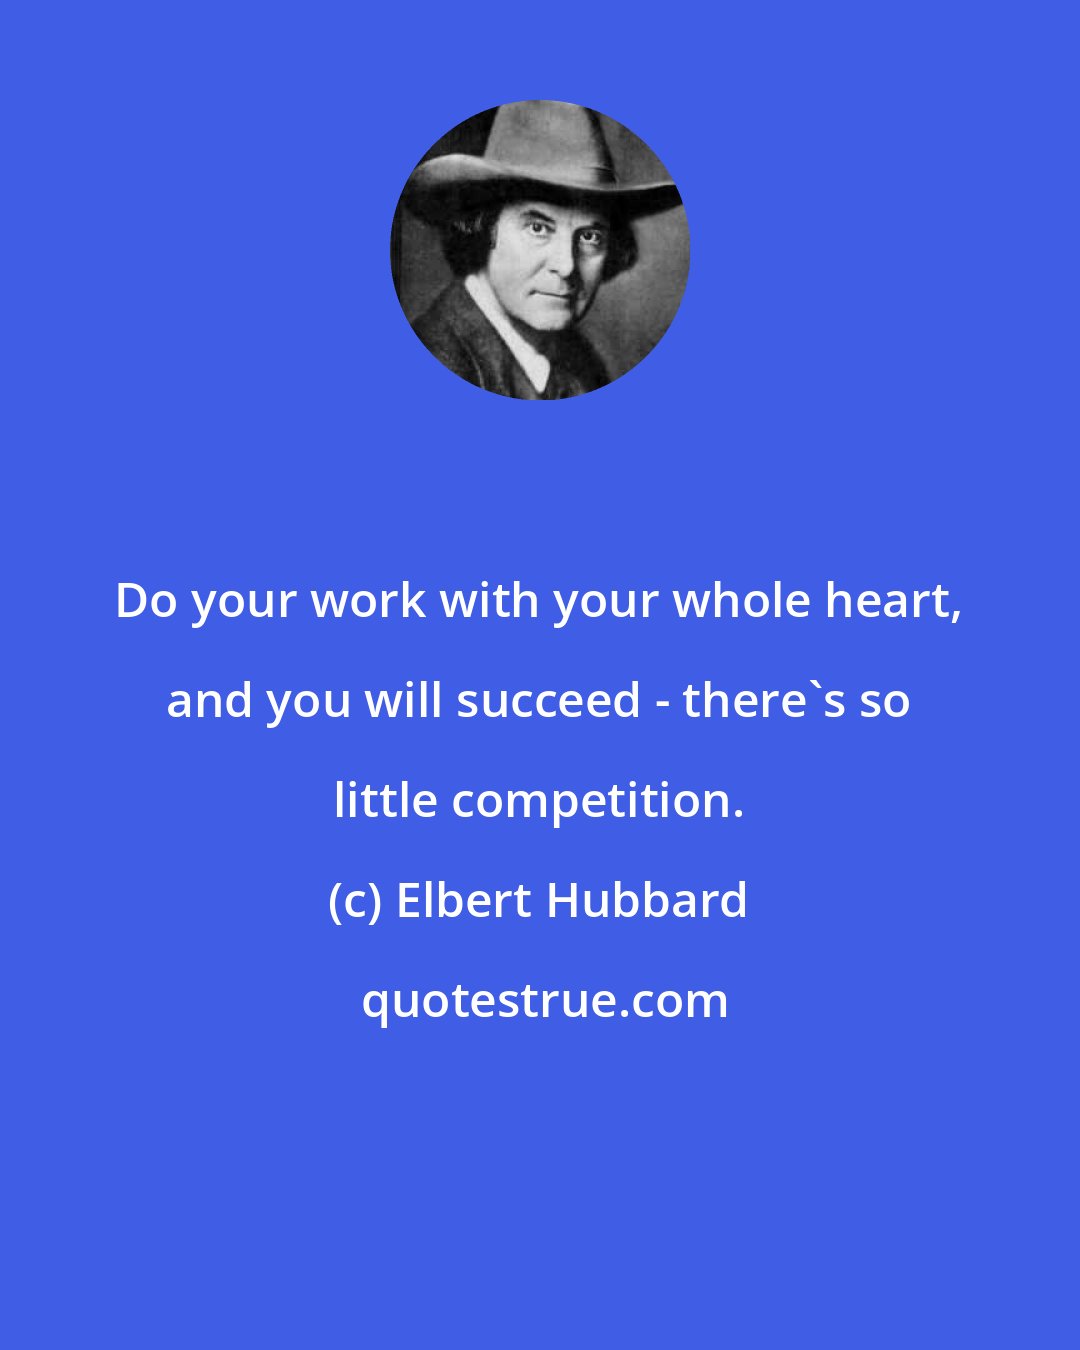 Elbert Hubbard: Do your work with your whole heart, and you will succeed - there's so little competition.